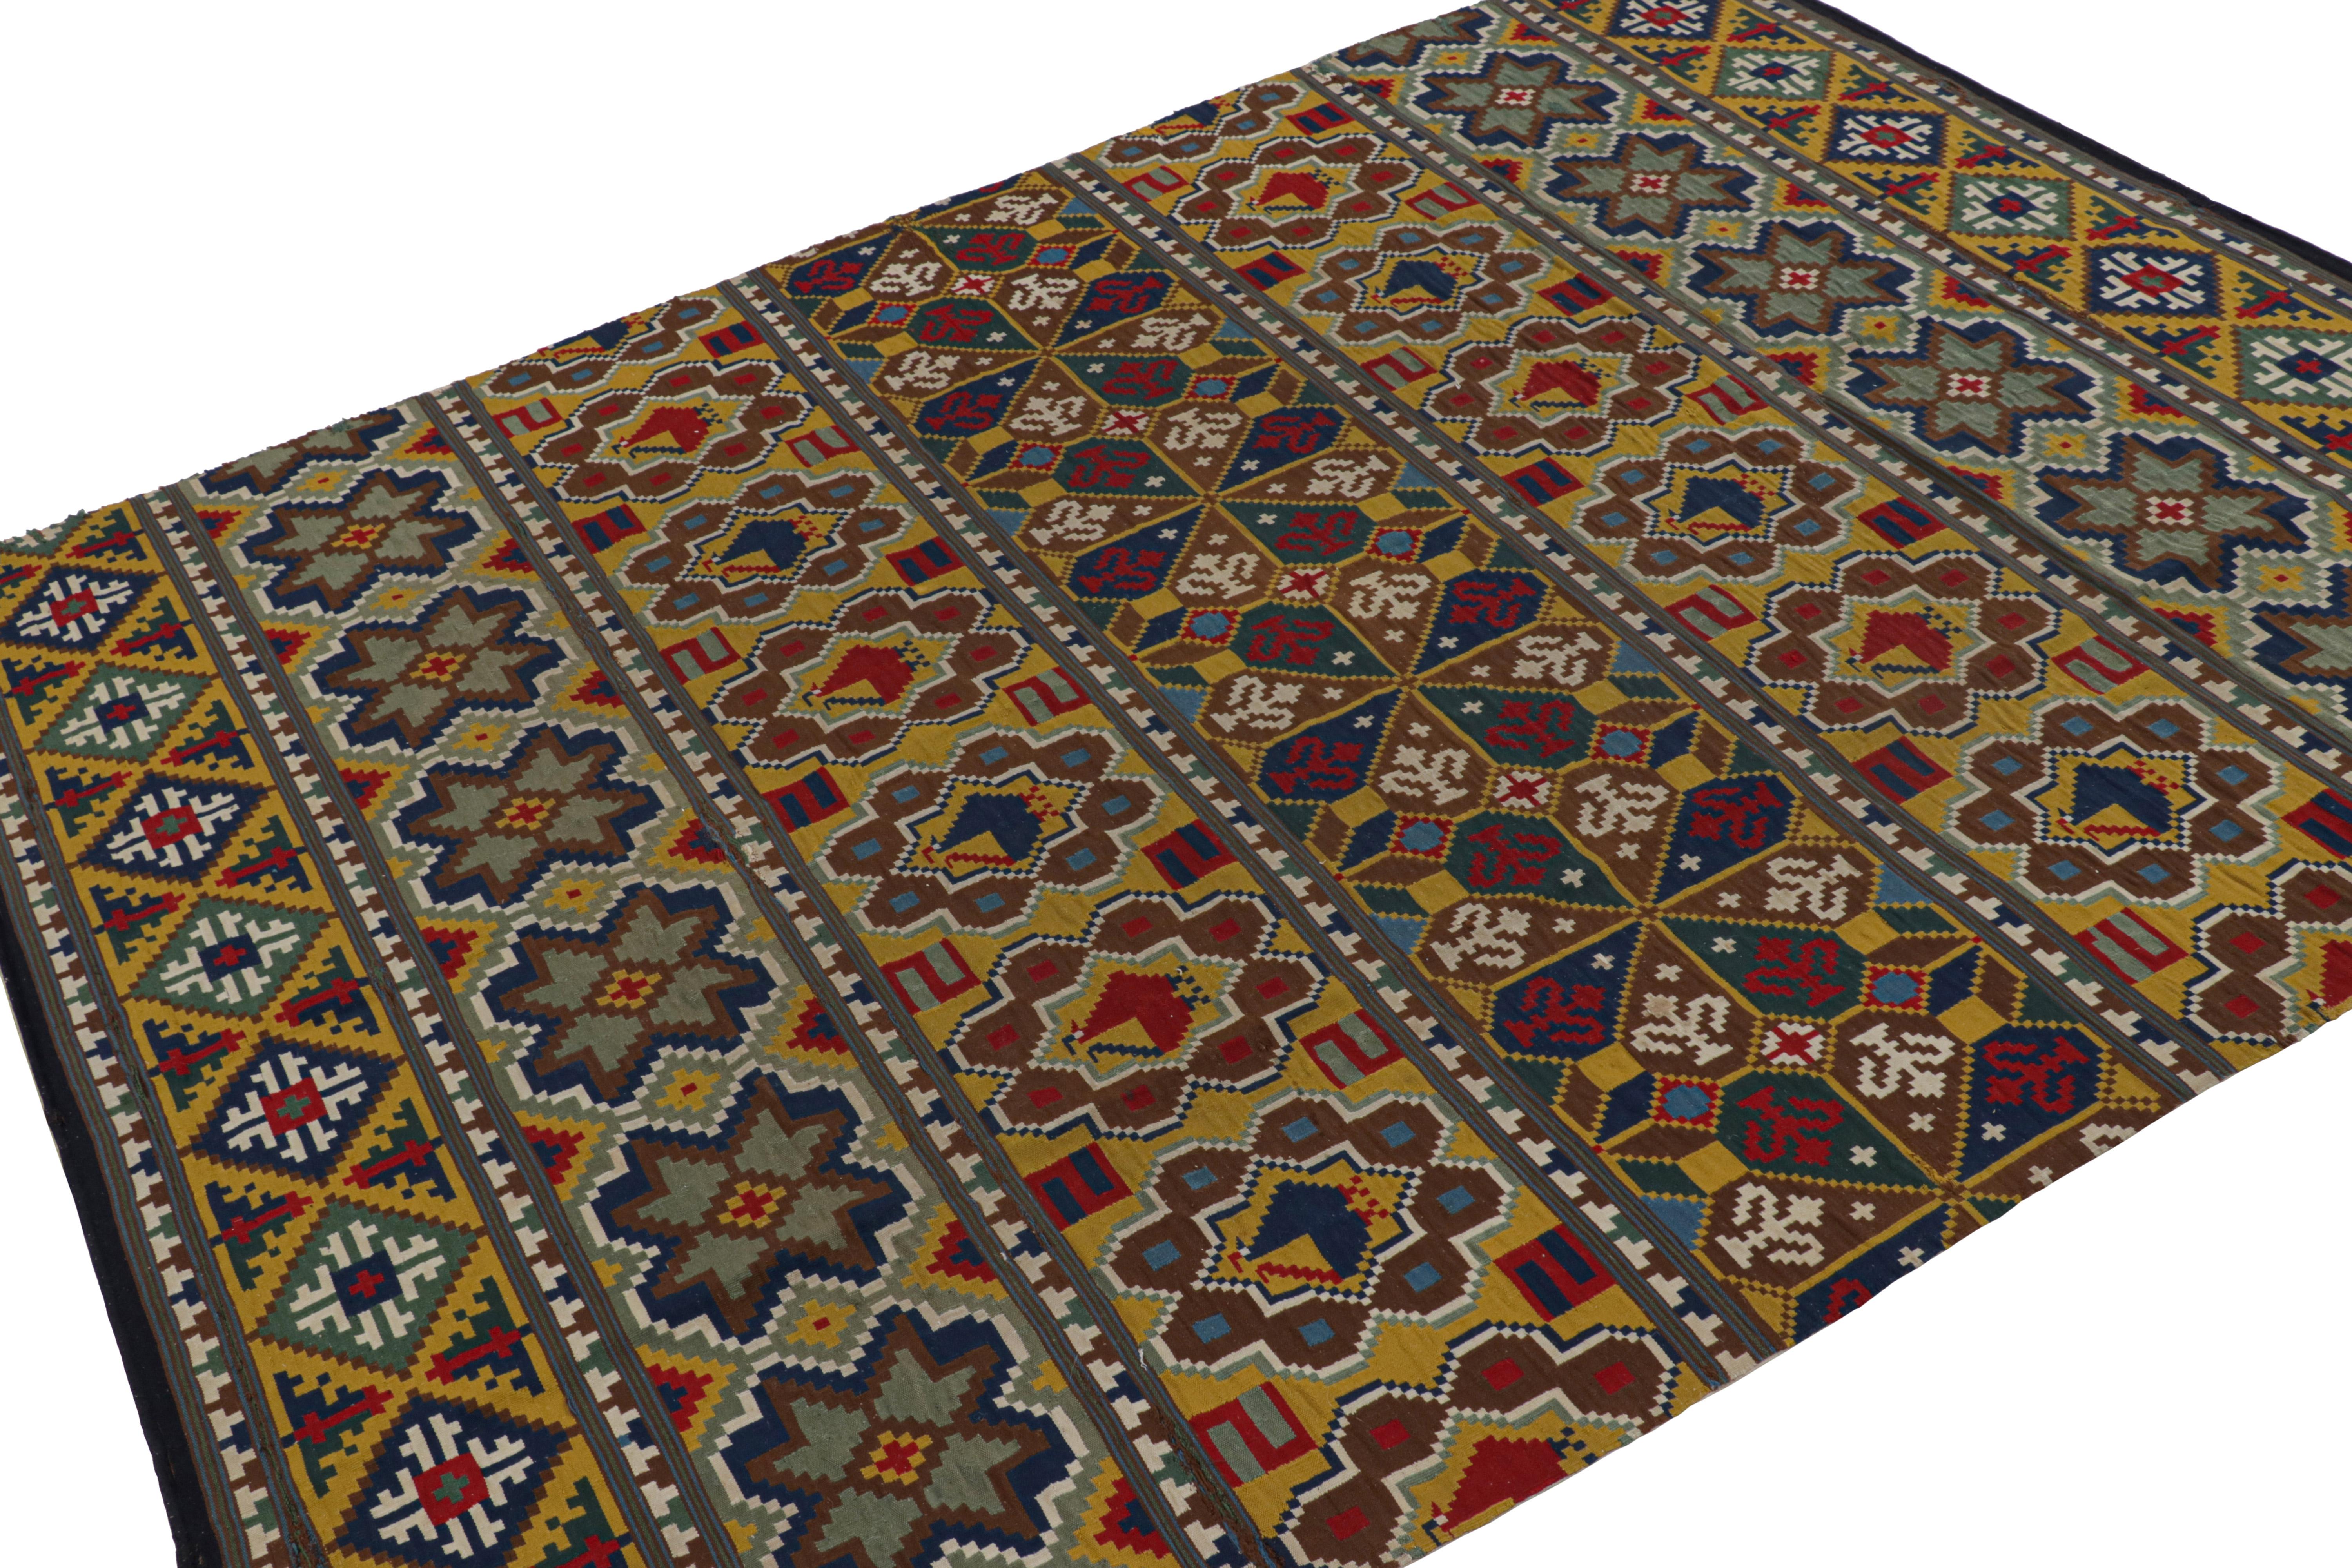 Hand-Woven Antique Swedish Textile with Polychromatic Patterns & Pictorial from Rug & Kilim For Sale